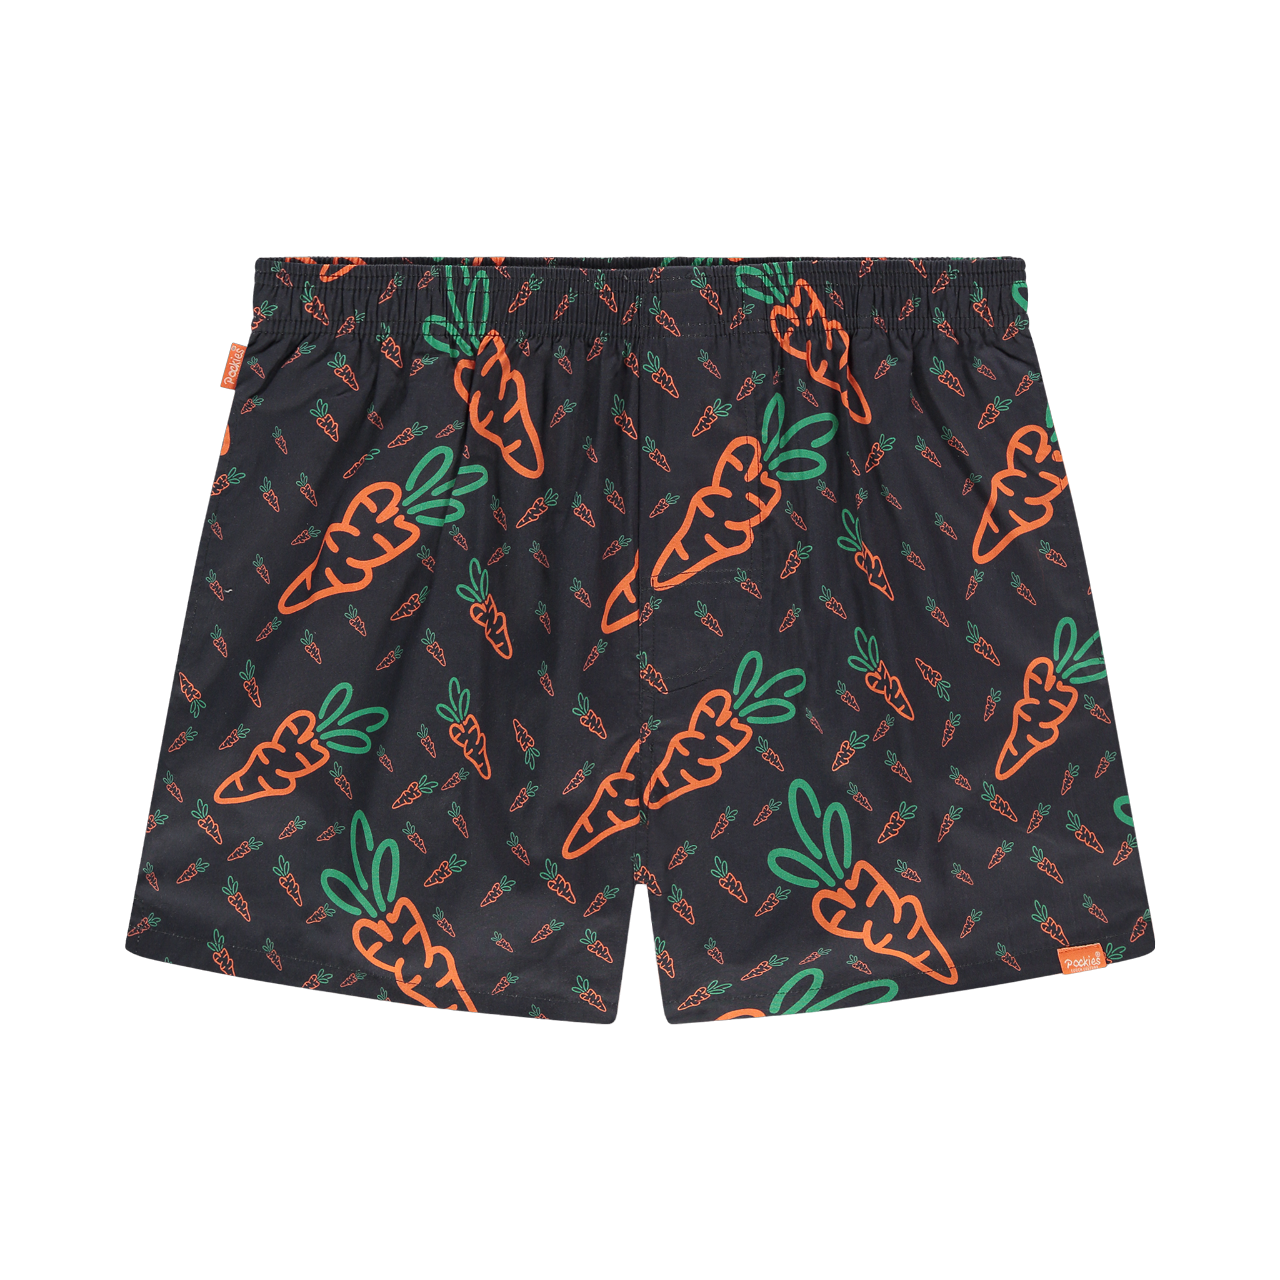 CARROTS BY POCKIES BOXERS - NAVY